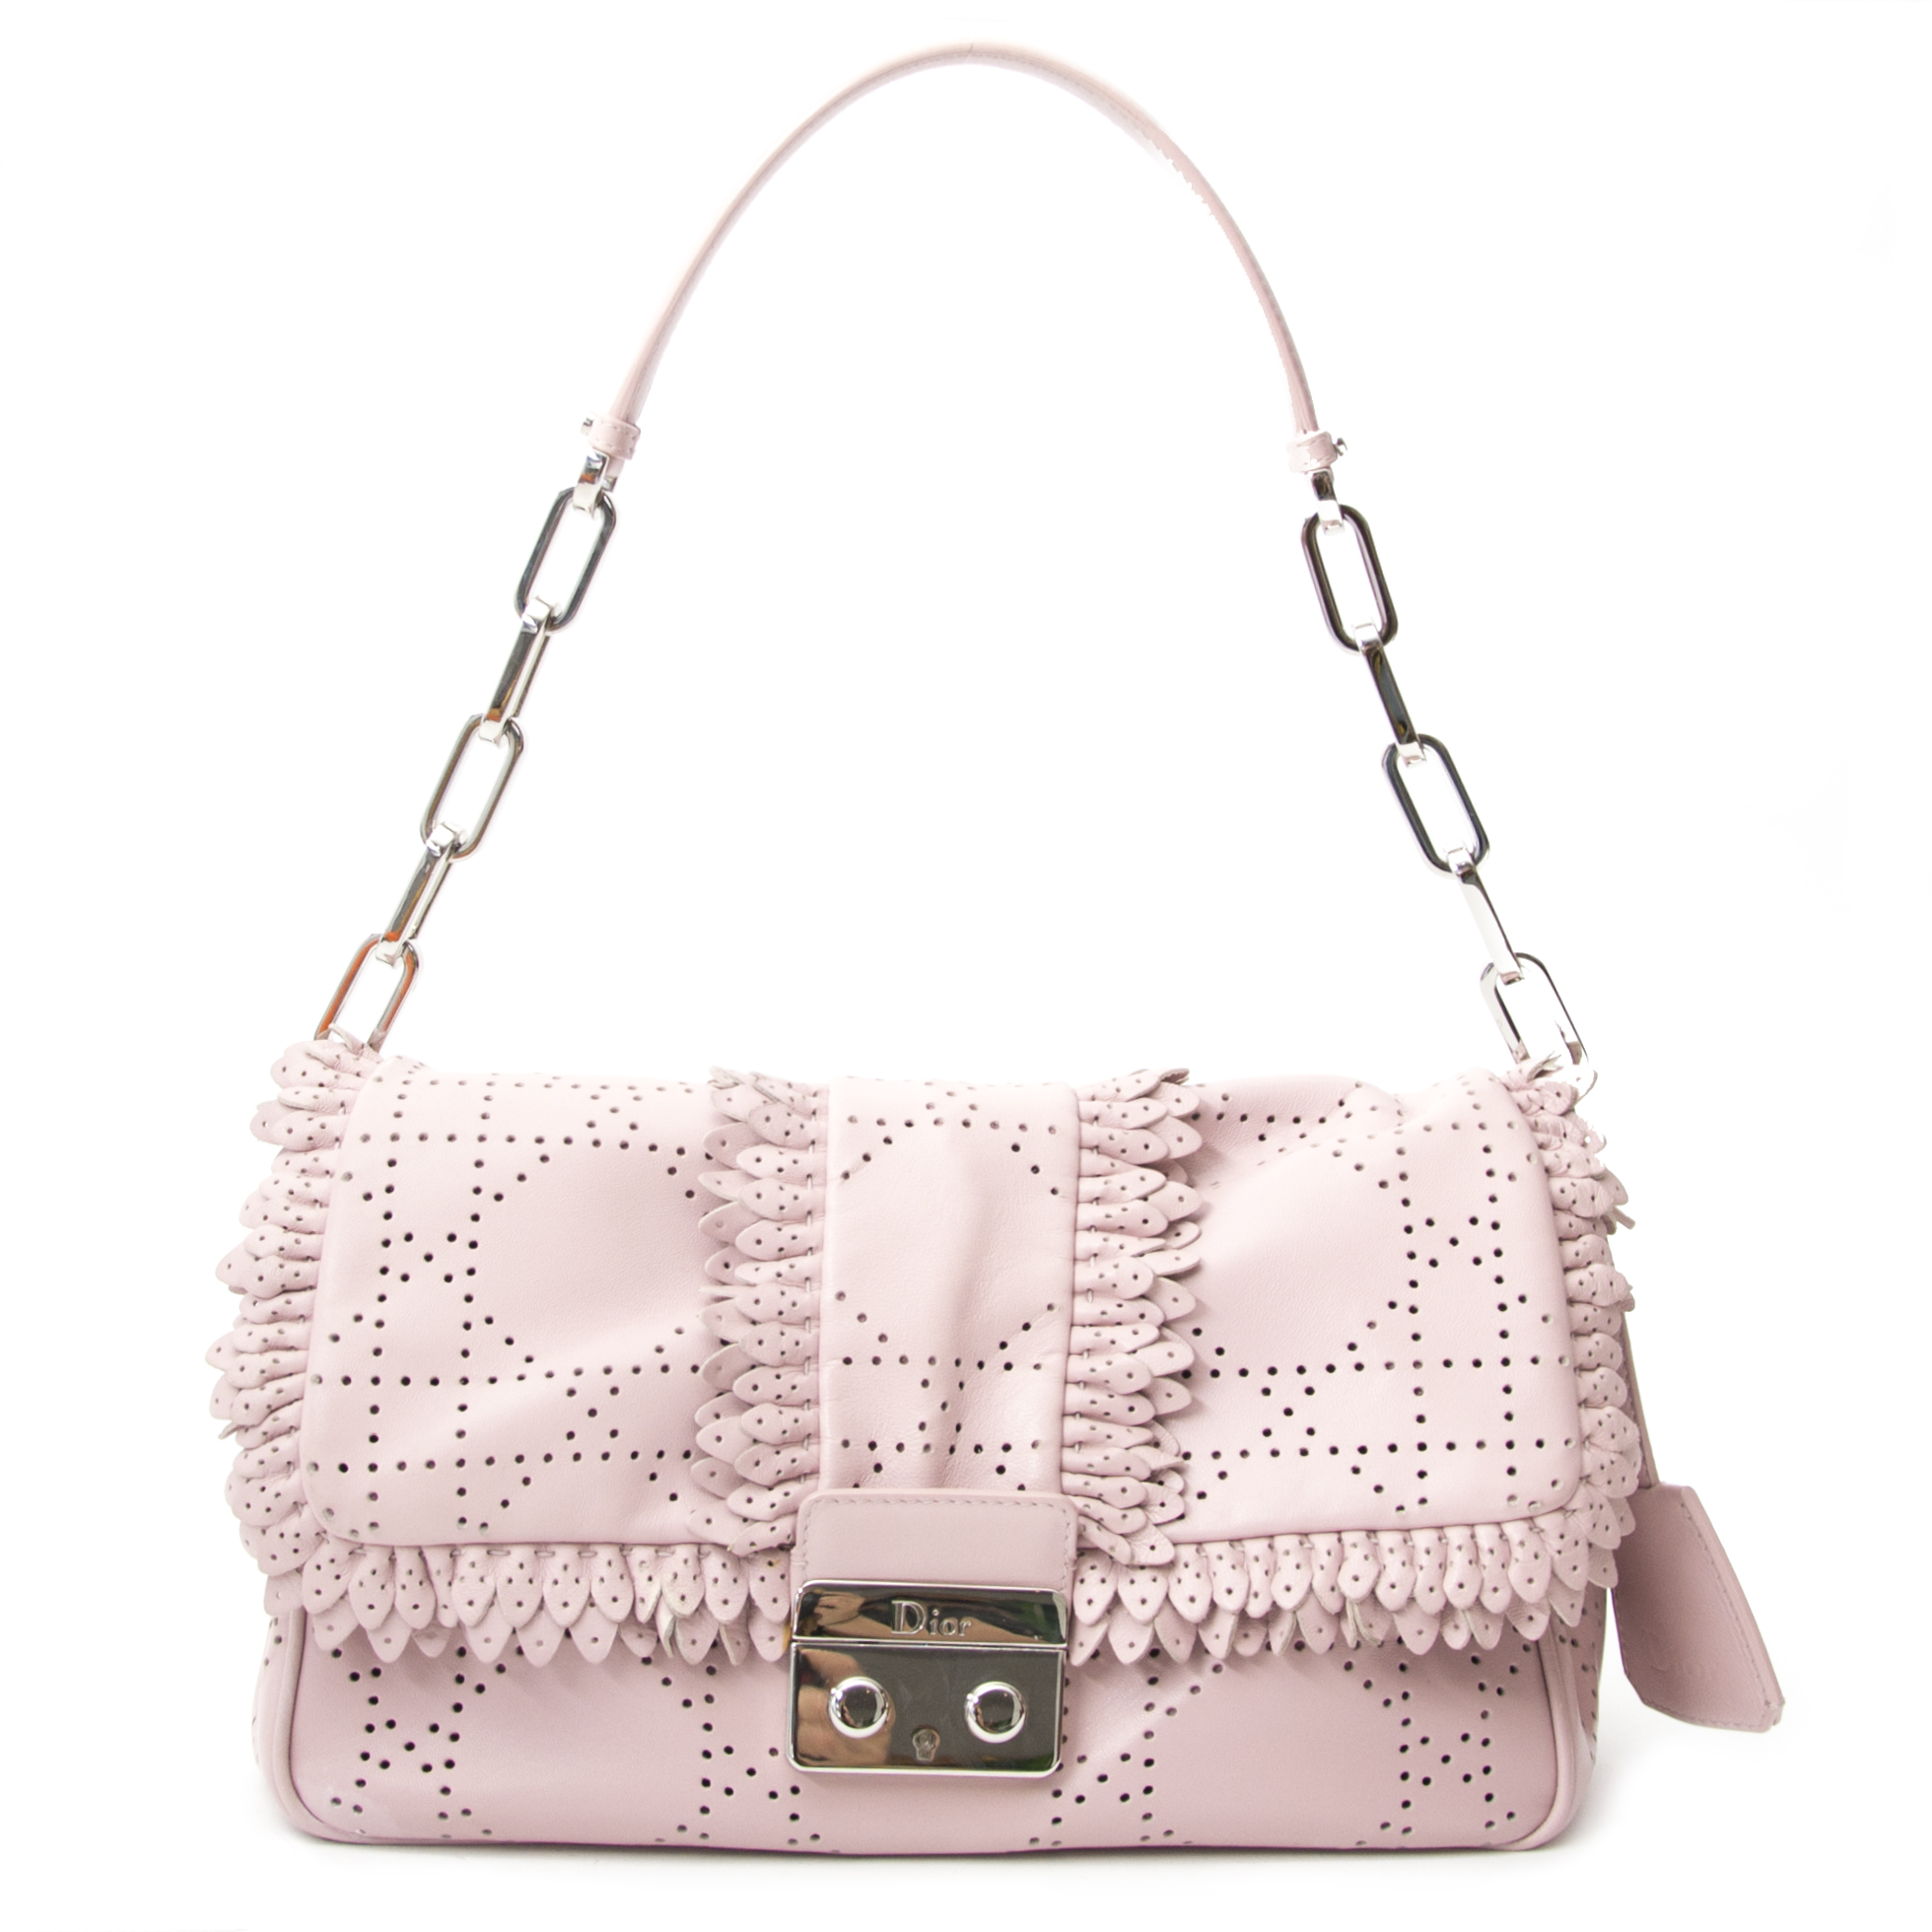 Vintage Authentic Dior Pink Leather Perforated New Lock Flap Bag France